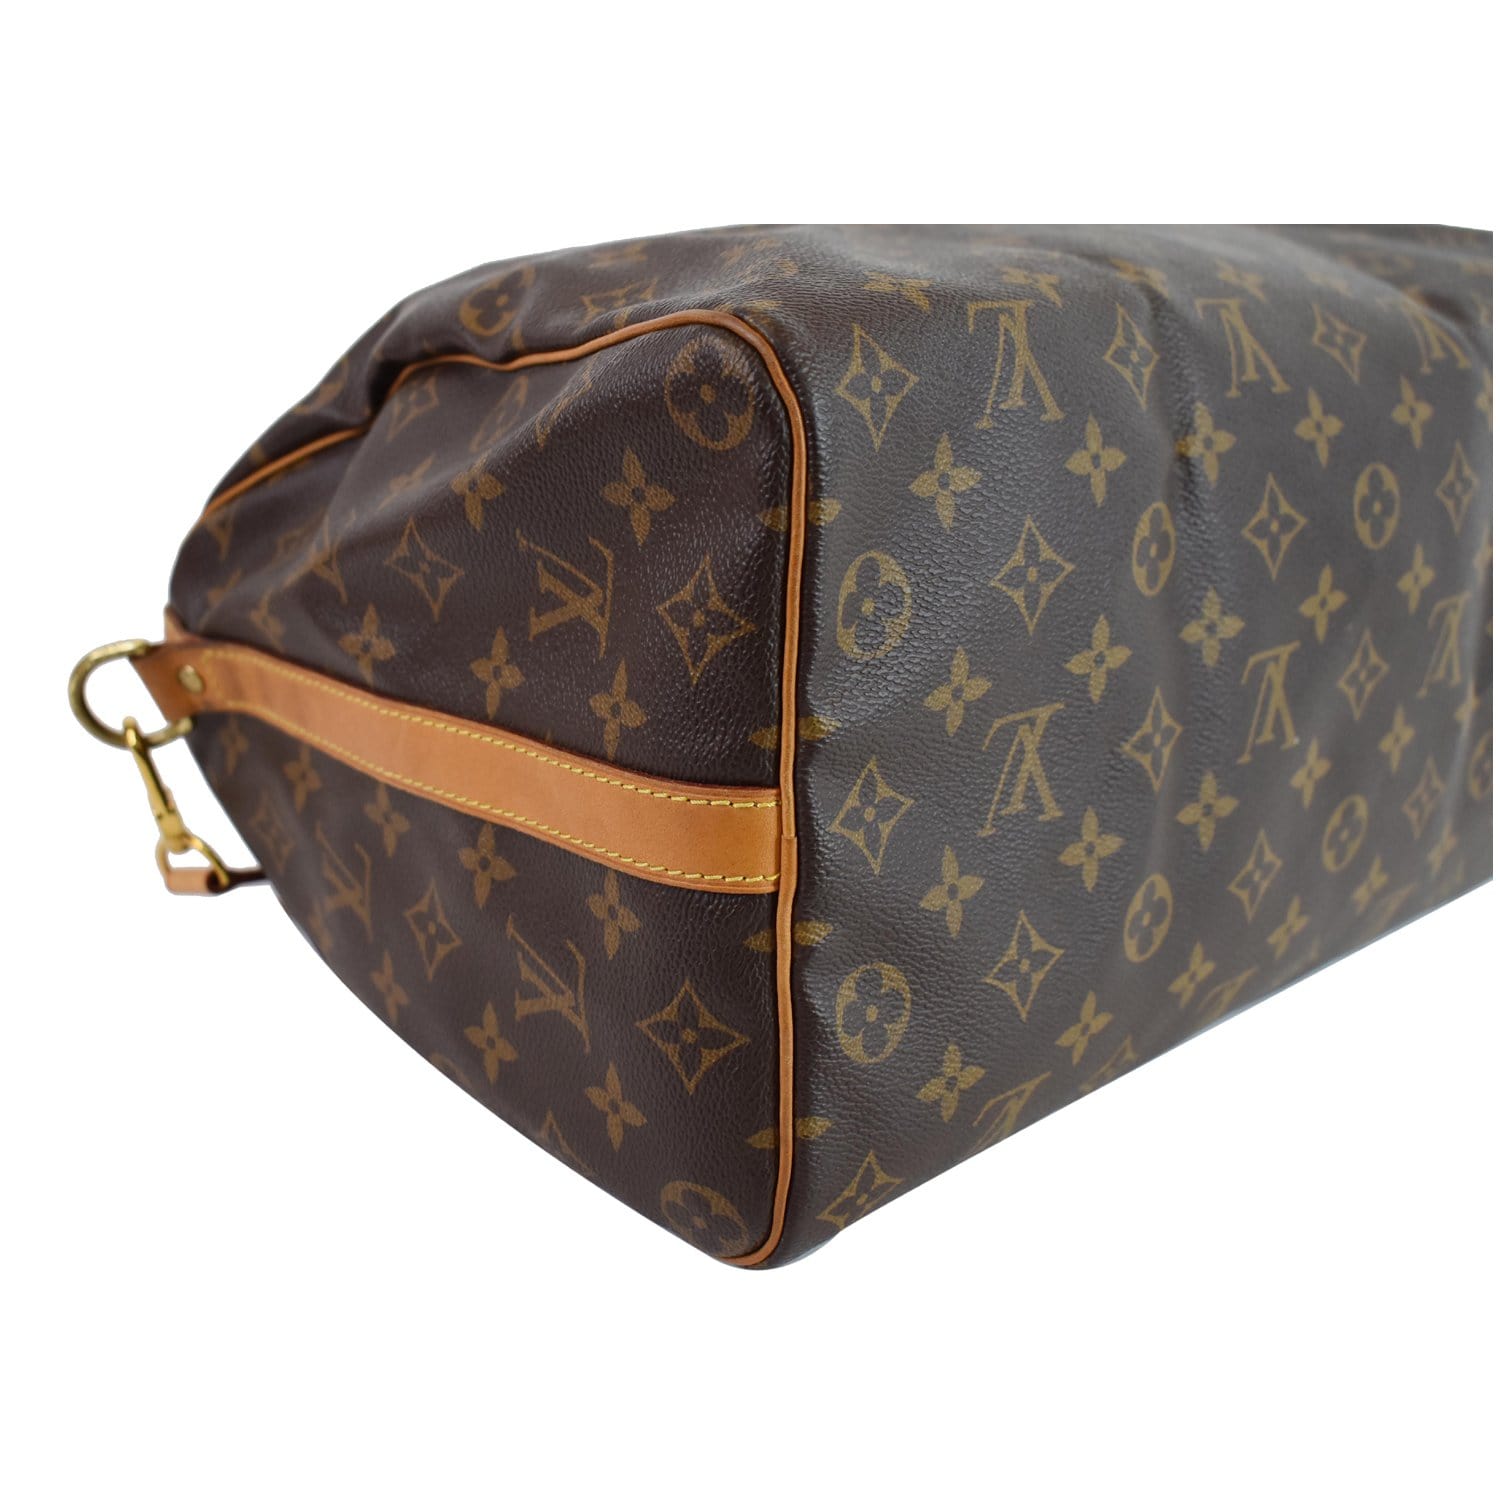 Pin by DaReal on B A G S  Bags, Louis vuitton speedy bag, Purses